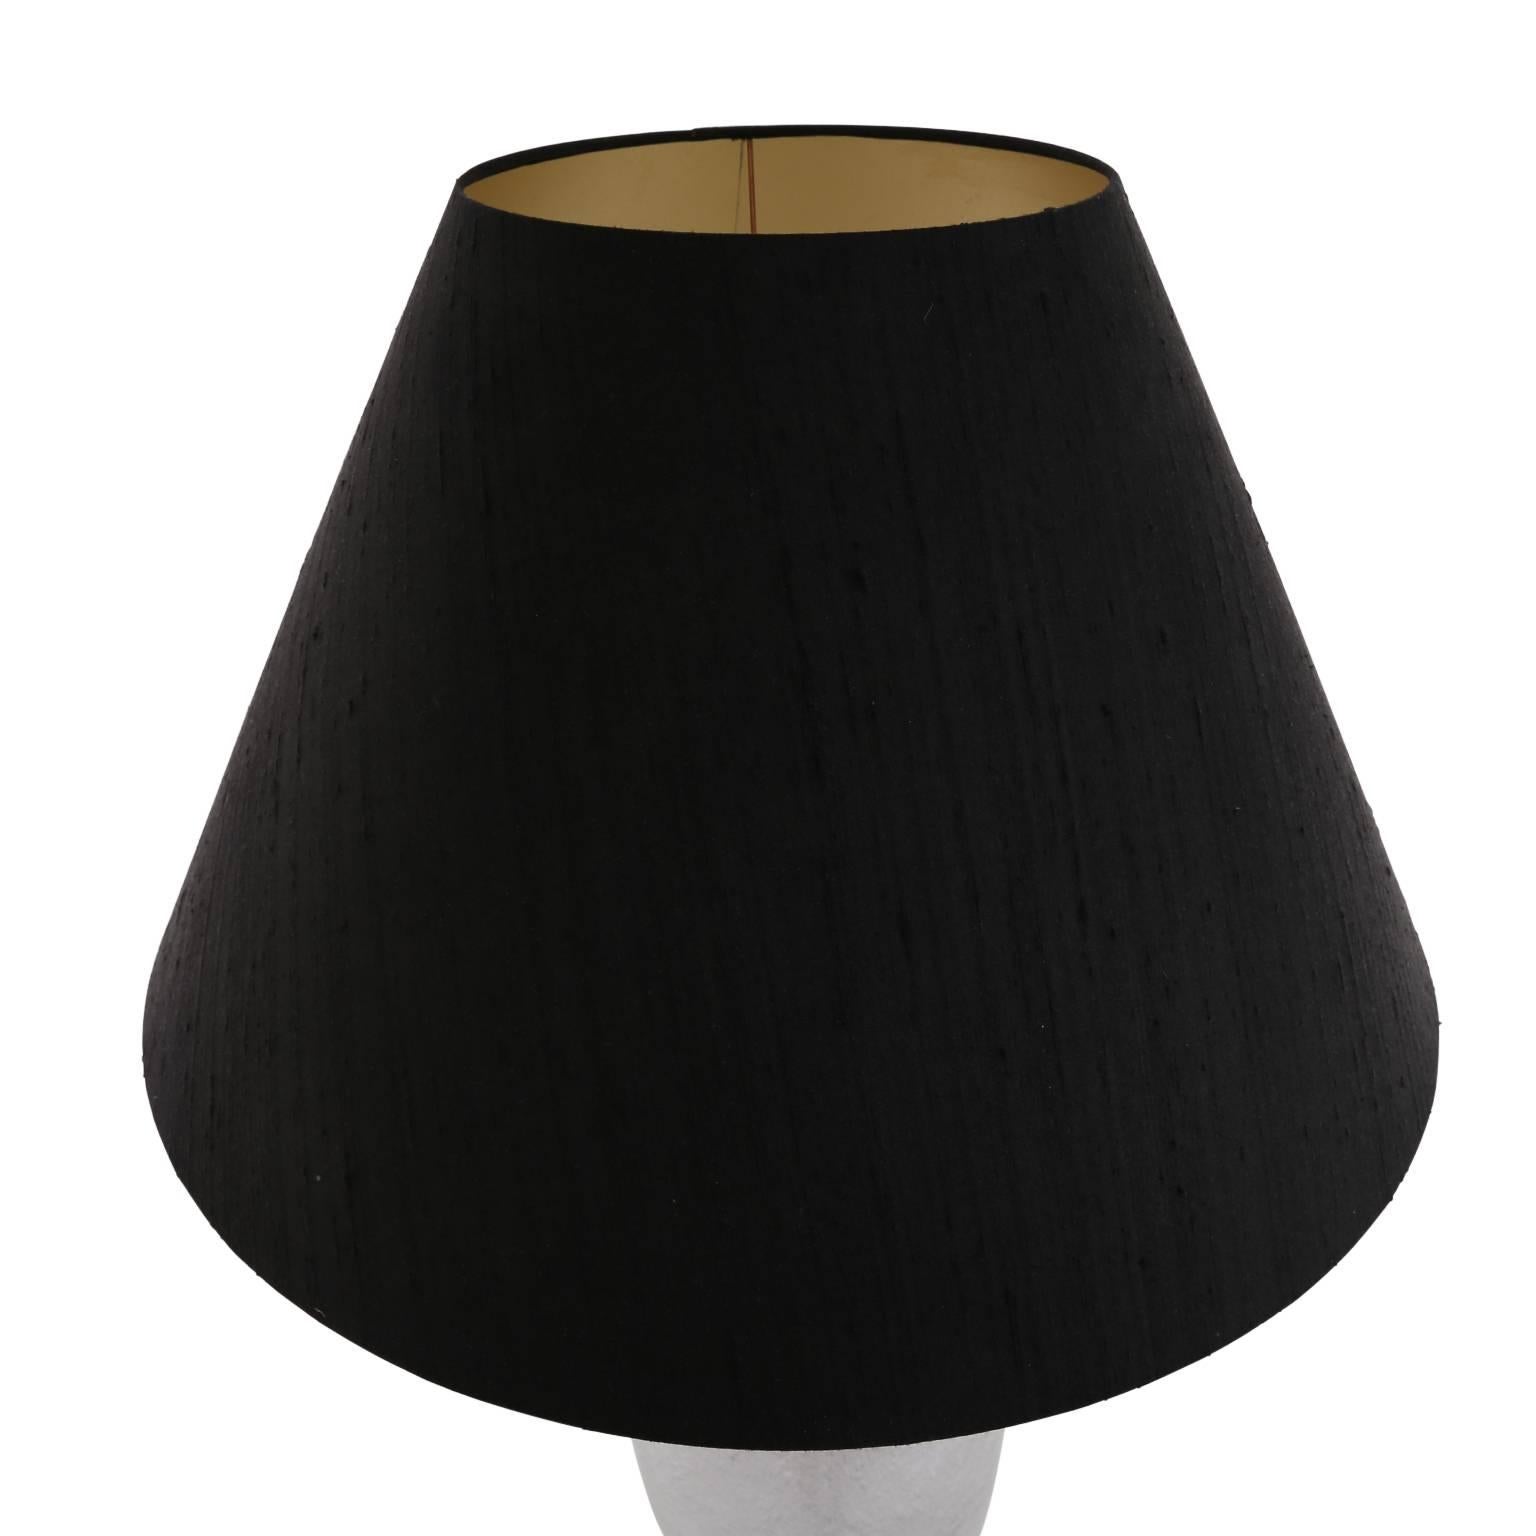 Large Murano glass table lamp with lampshade in black fabric.